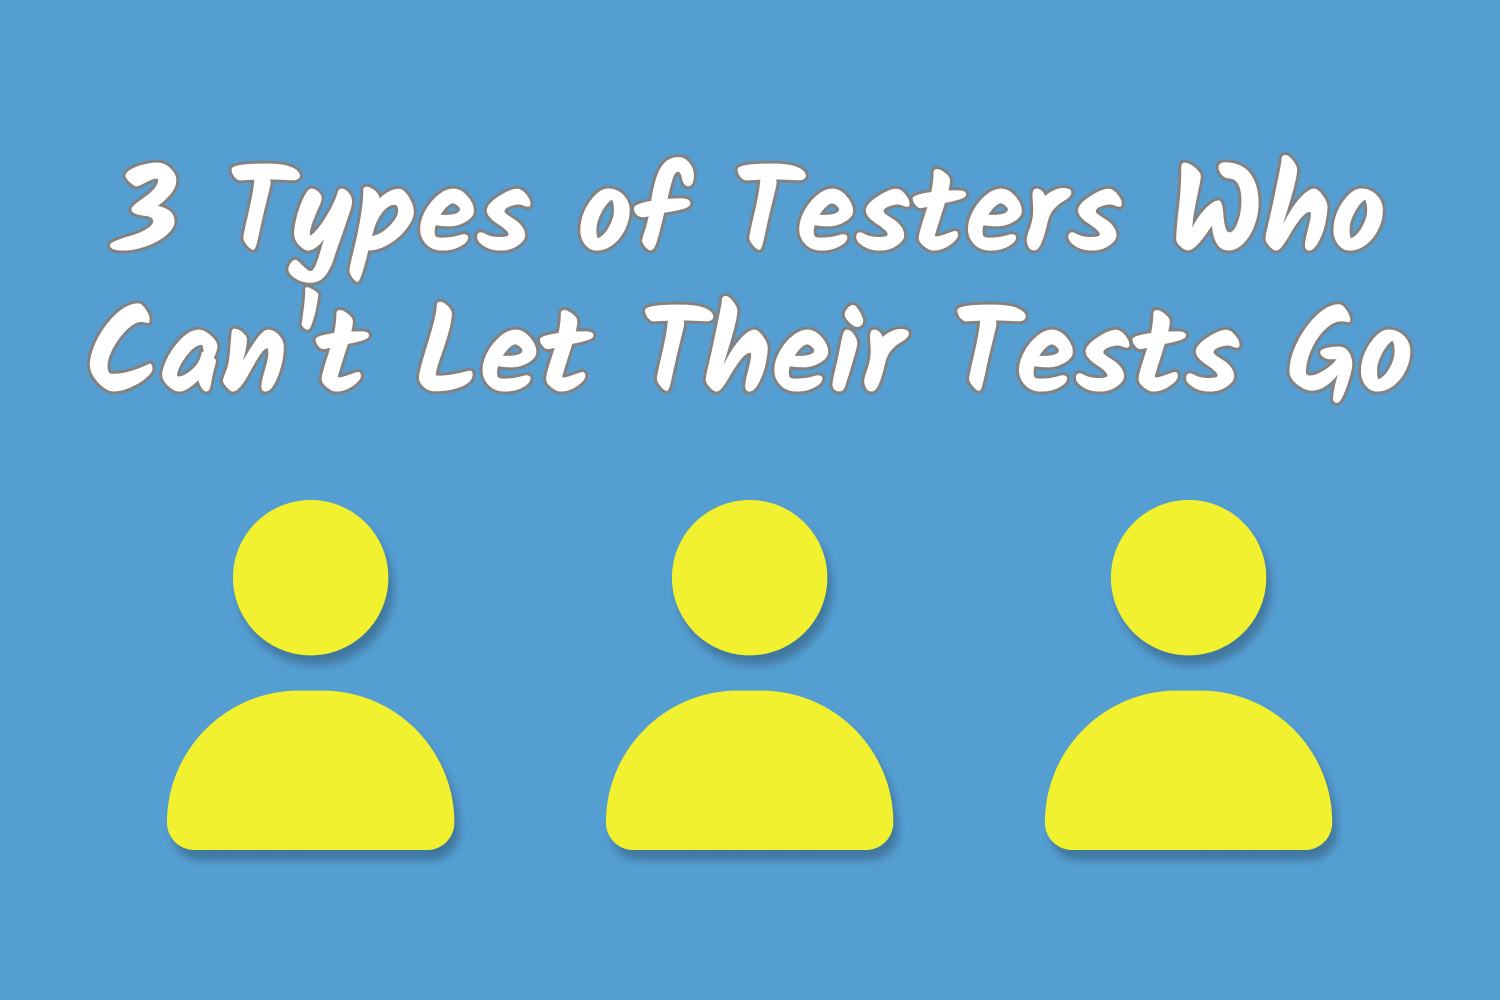 3 Types of Testers Who Can't Let Their Tests Go